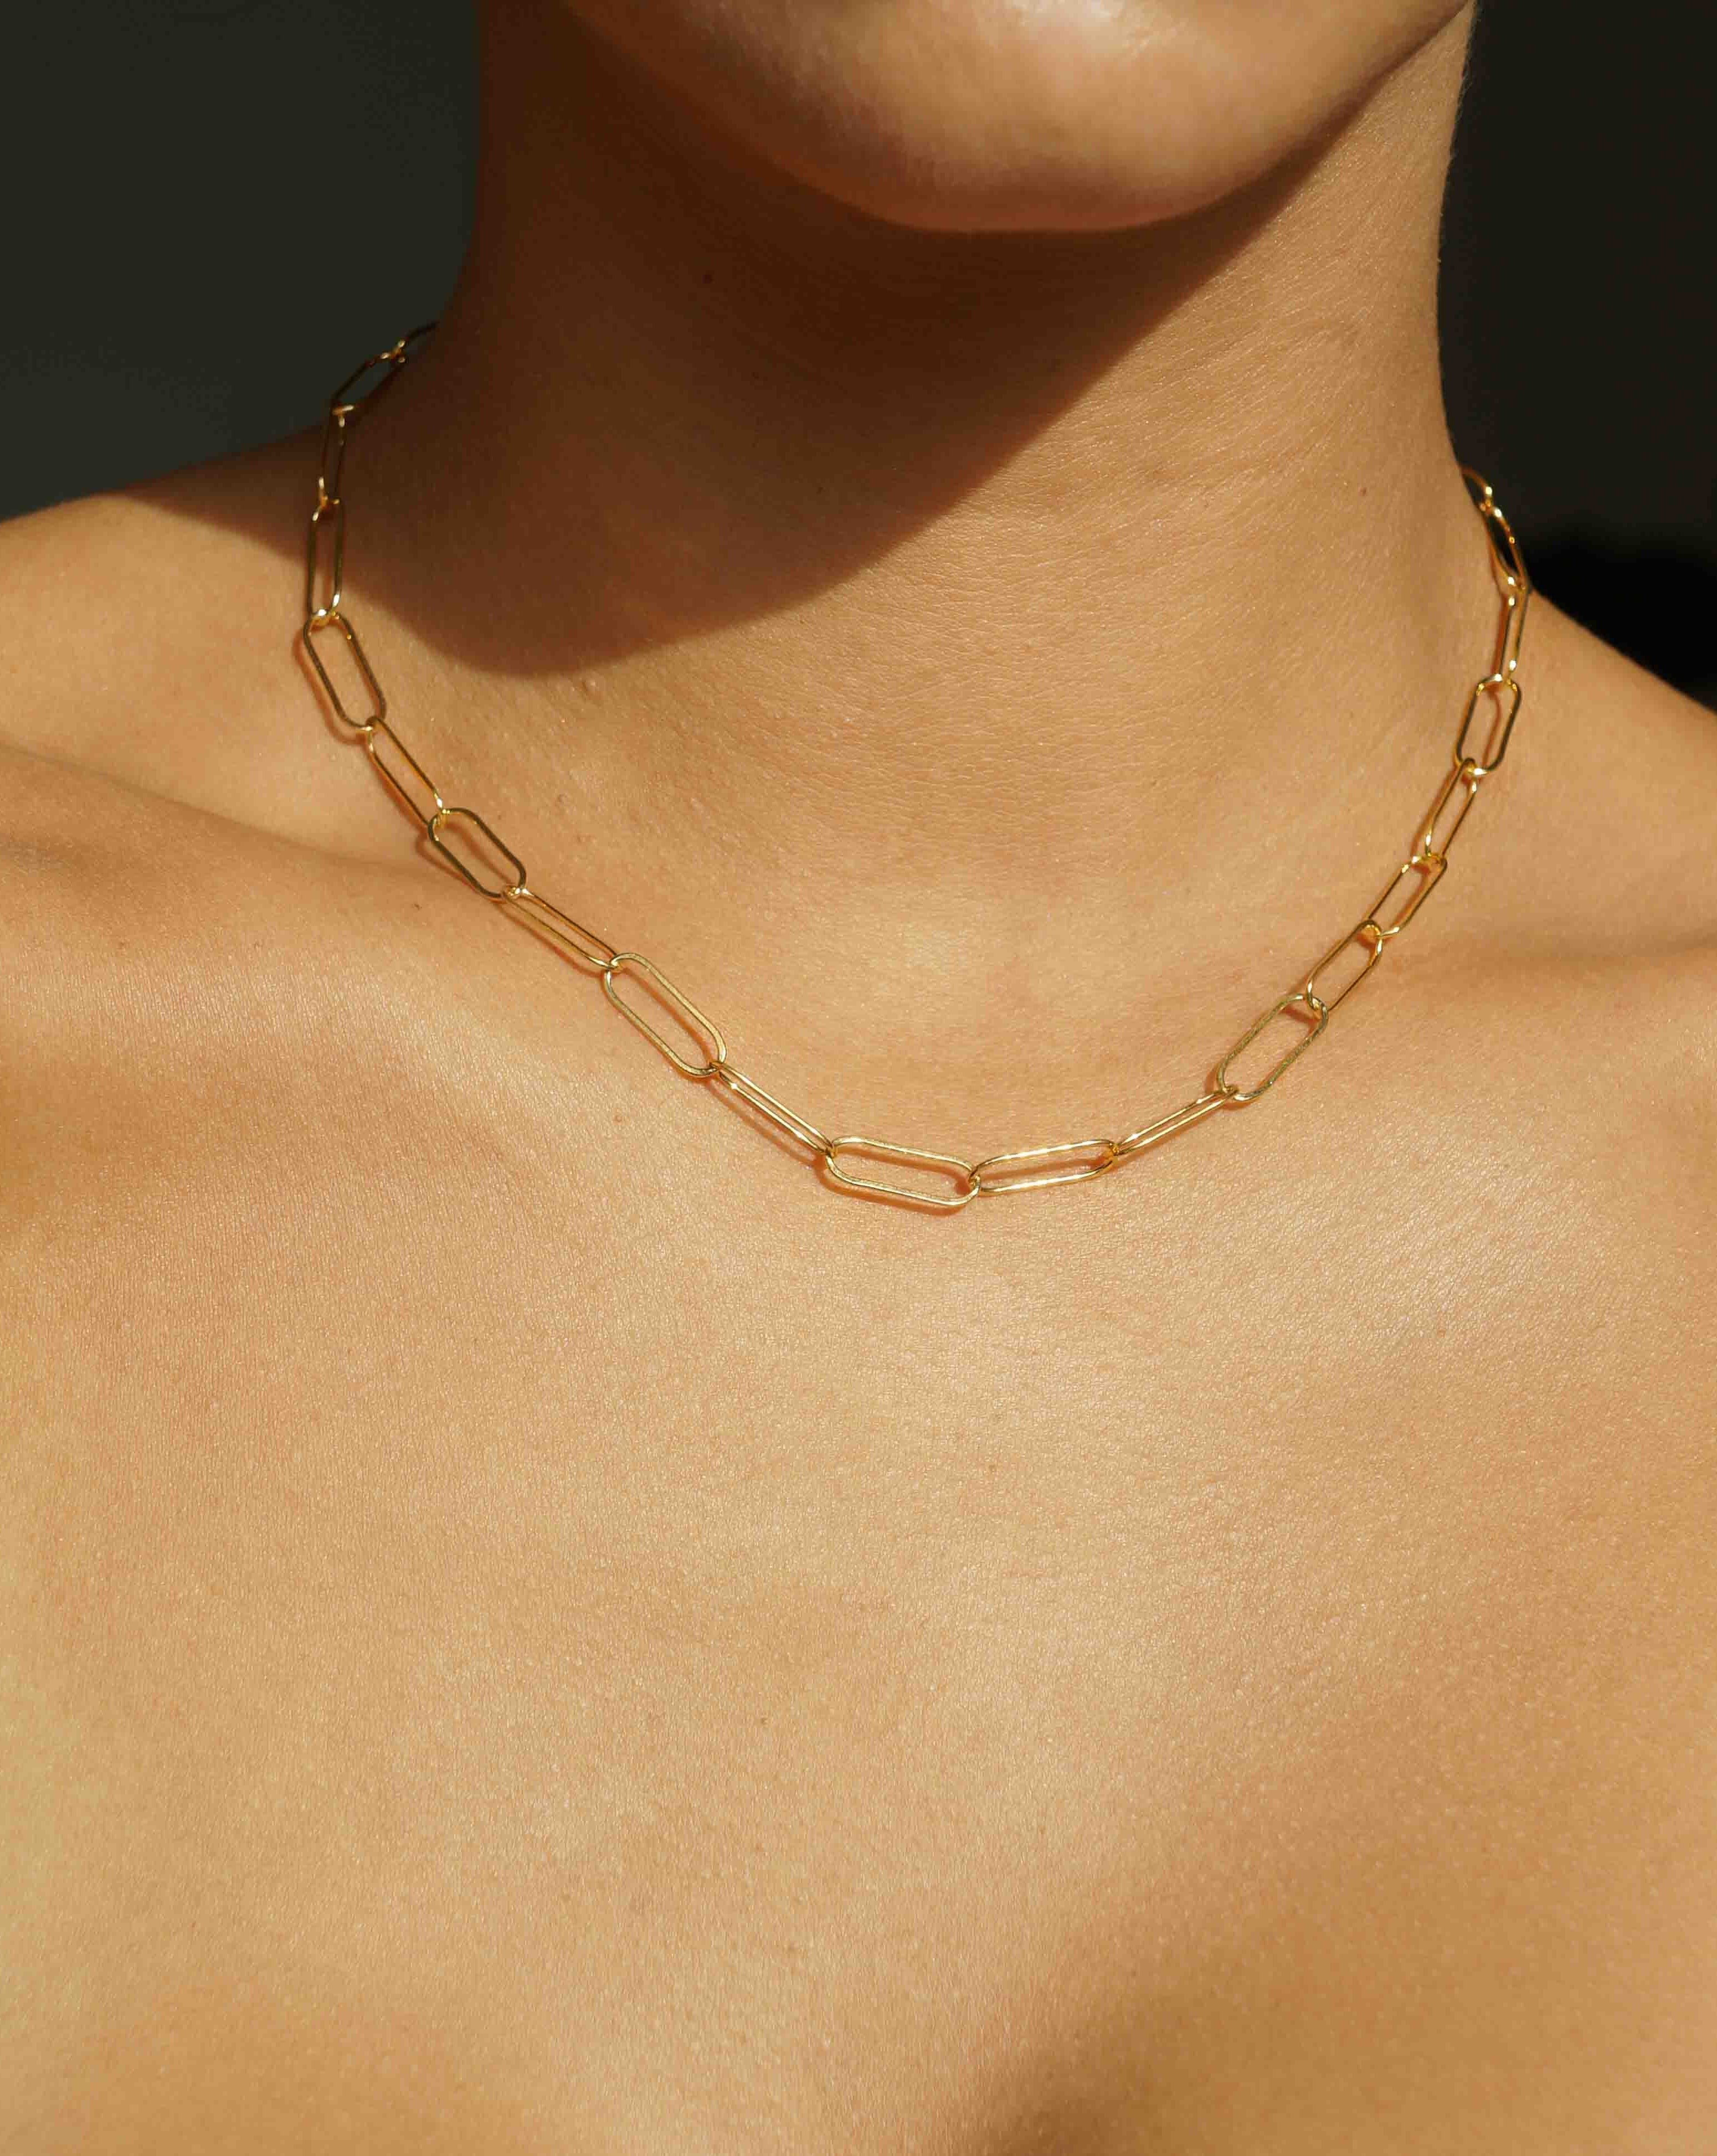 Muse Chain Necklace by KOZAKH. A 14 to 16 inch adjustable length, flat oval link chain necklace, crafted in 14K Gold Filled. 